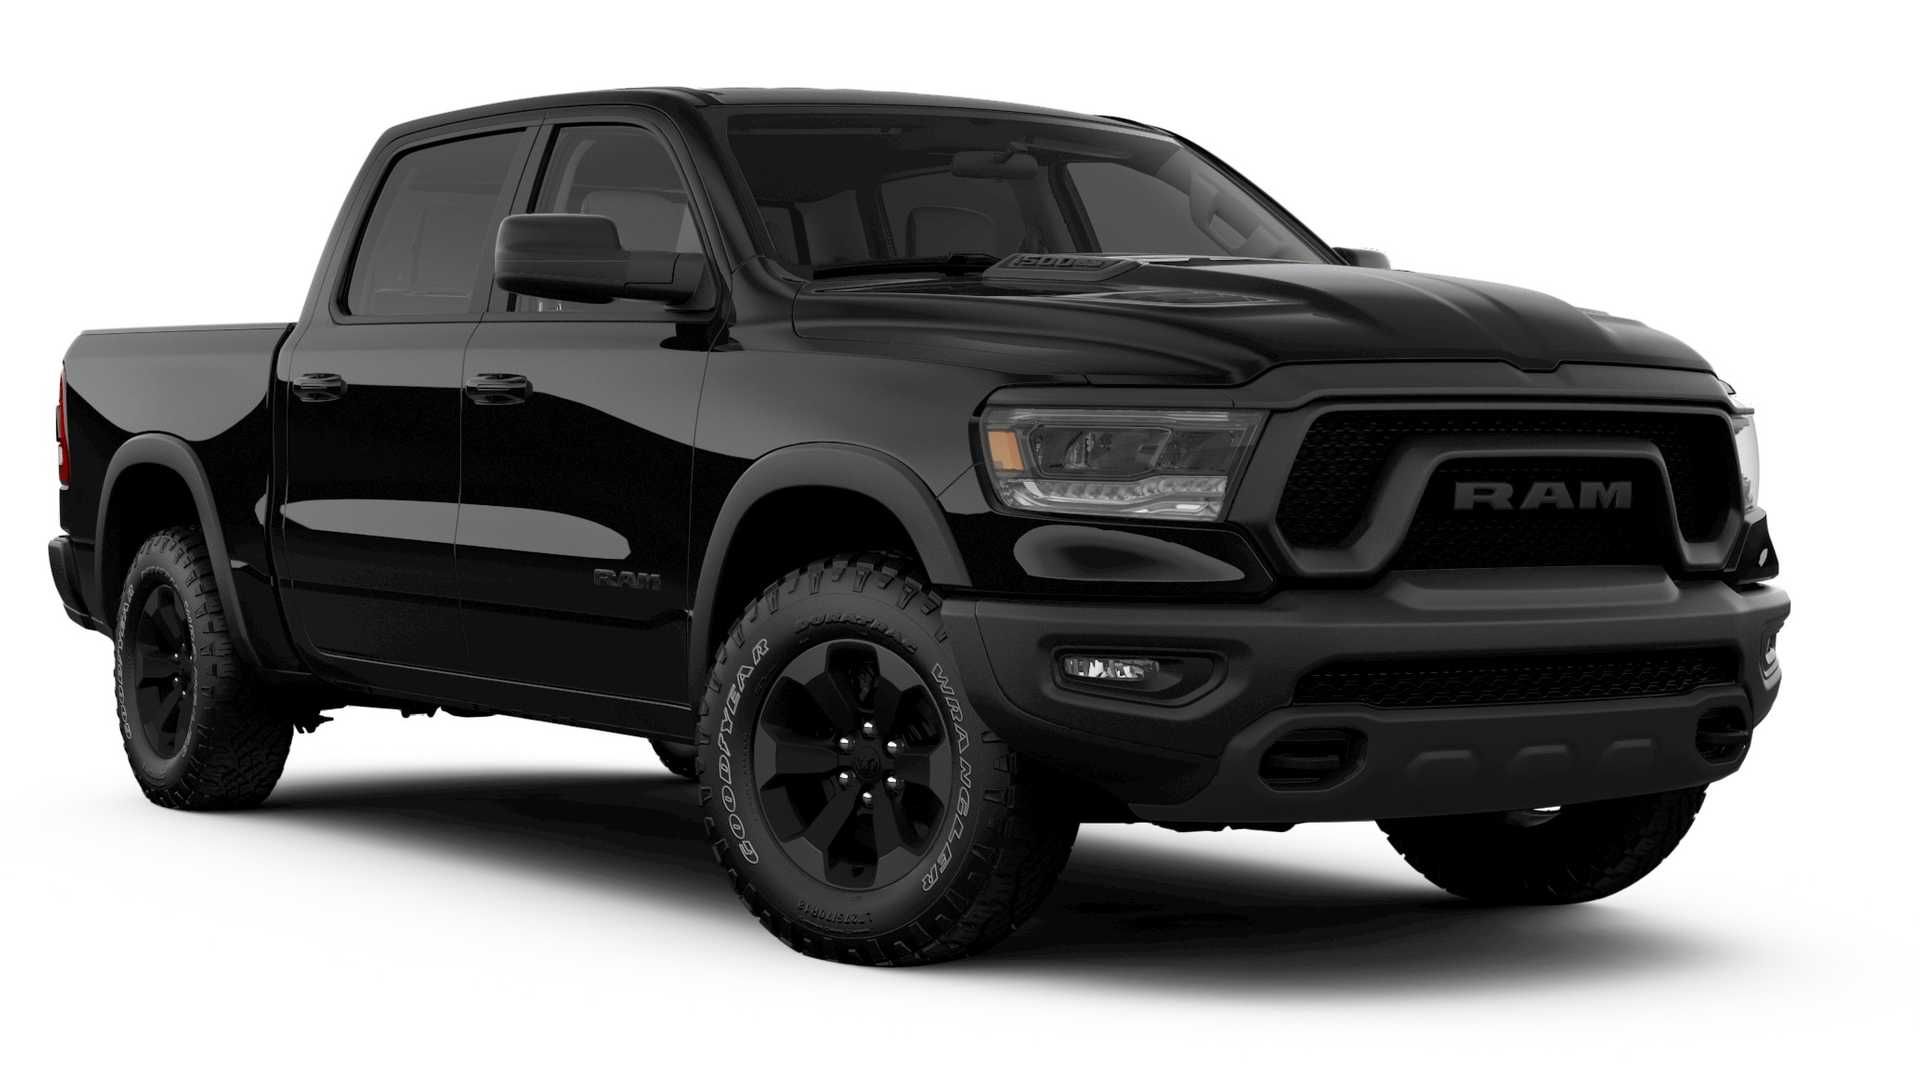 2021 Ram 1500 Rebel To Embrace Noir Touches With Night Edition